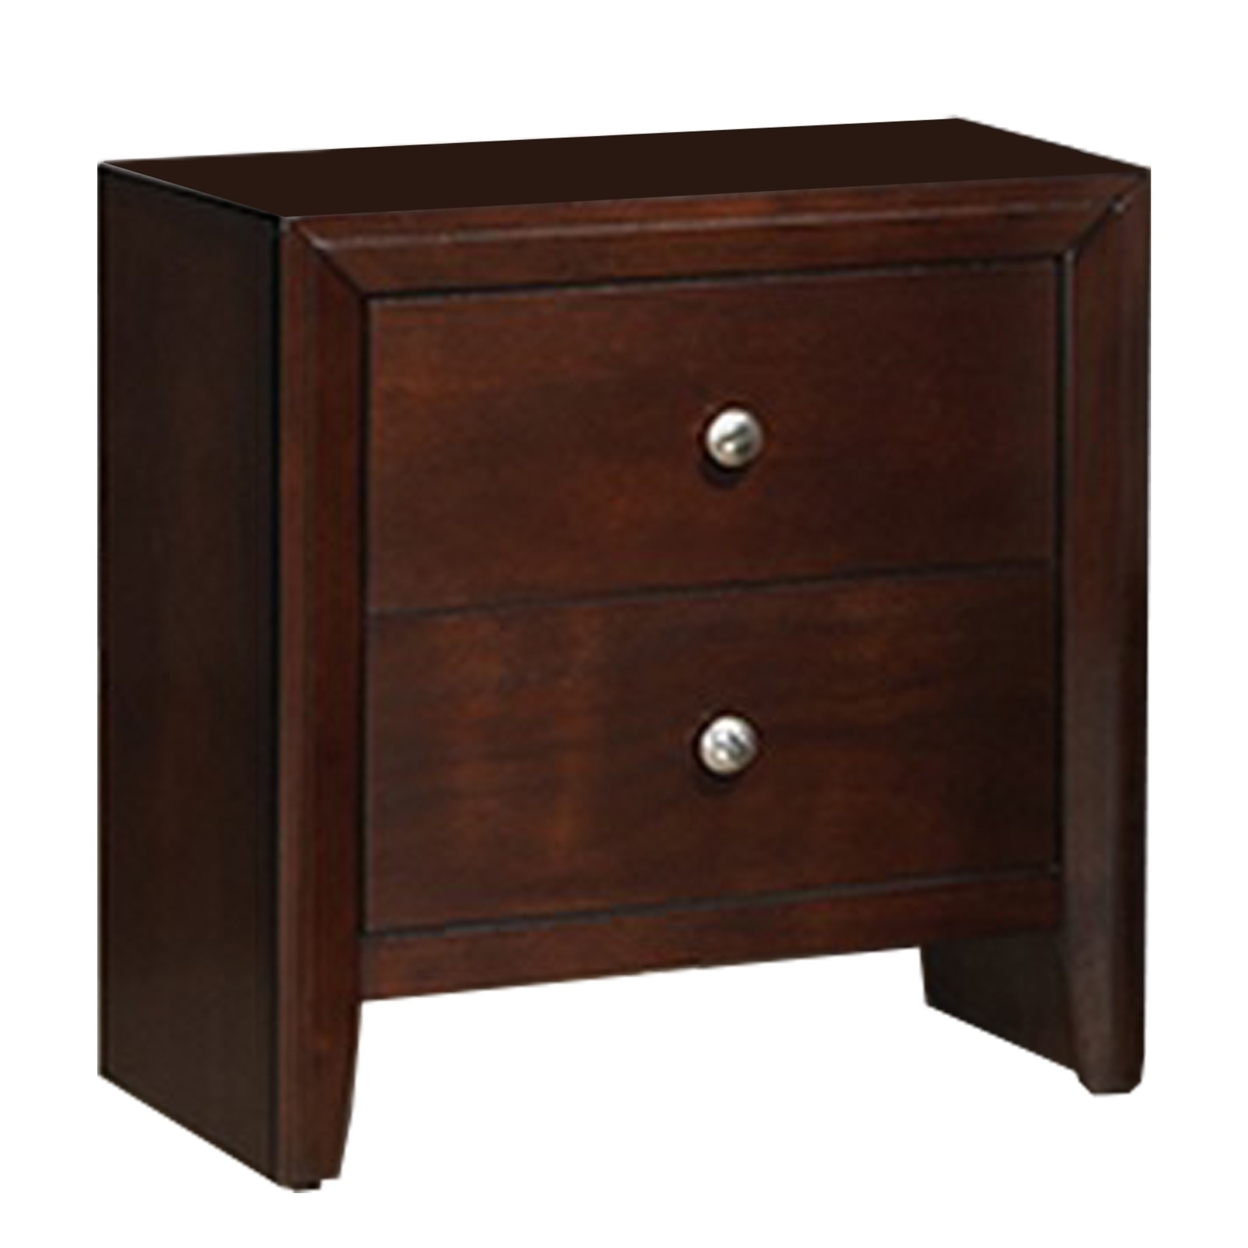 24 Inches 2 Drawer Wooden Nightstand With Metal Pulls, Brown- Saltoro Sherpi